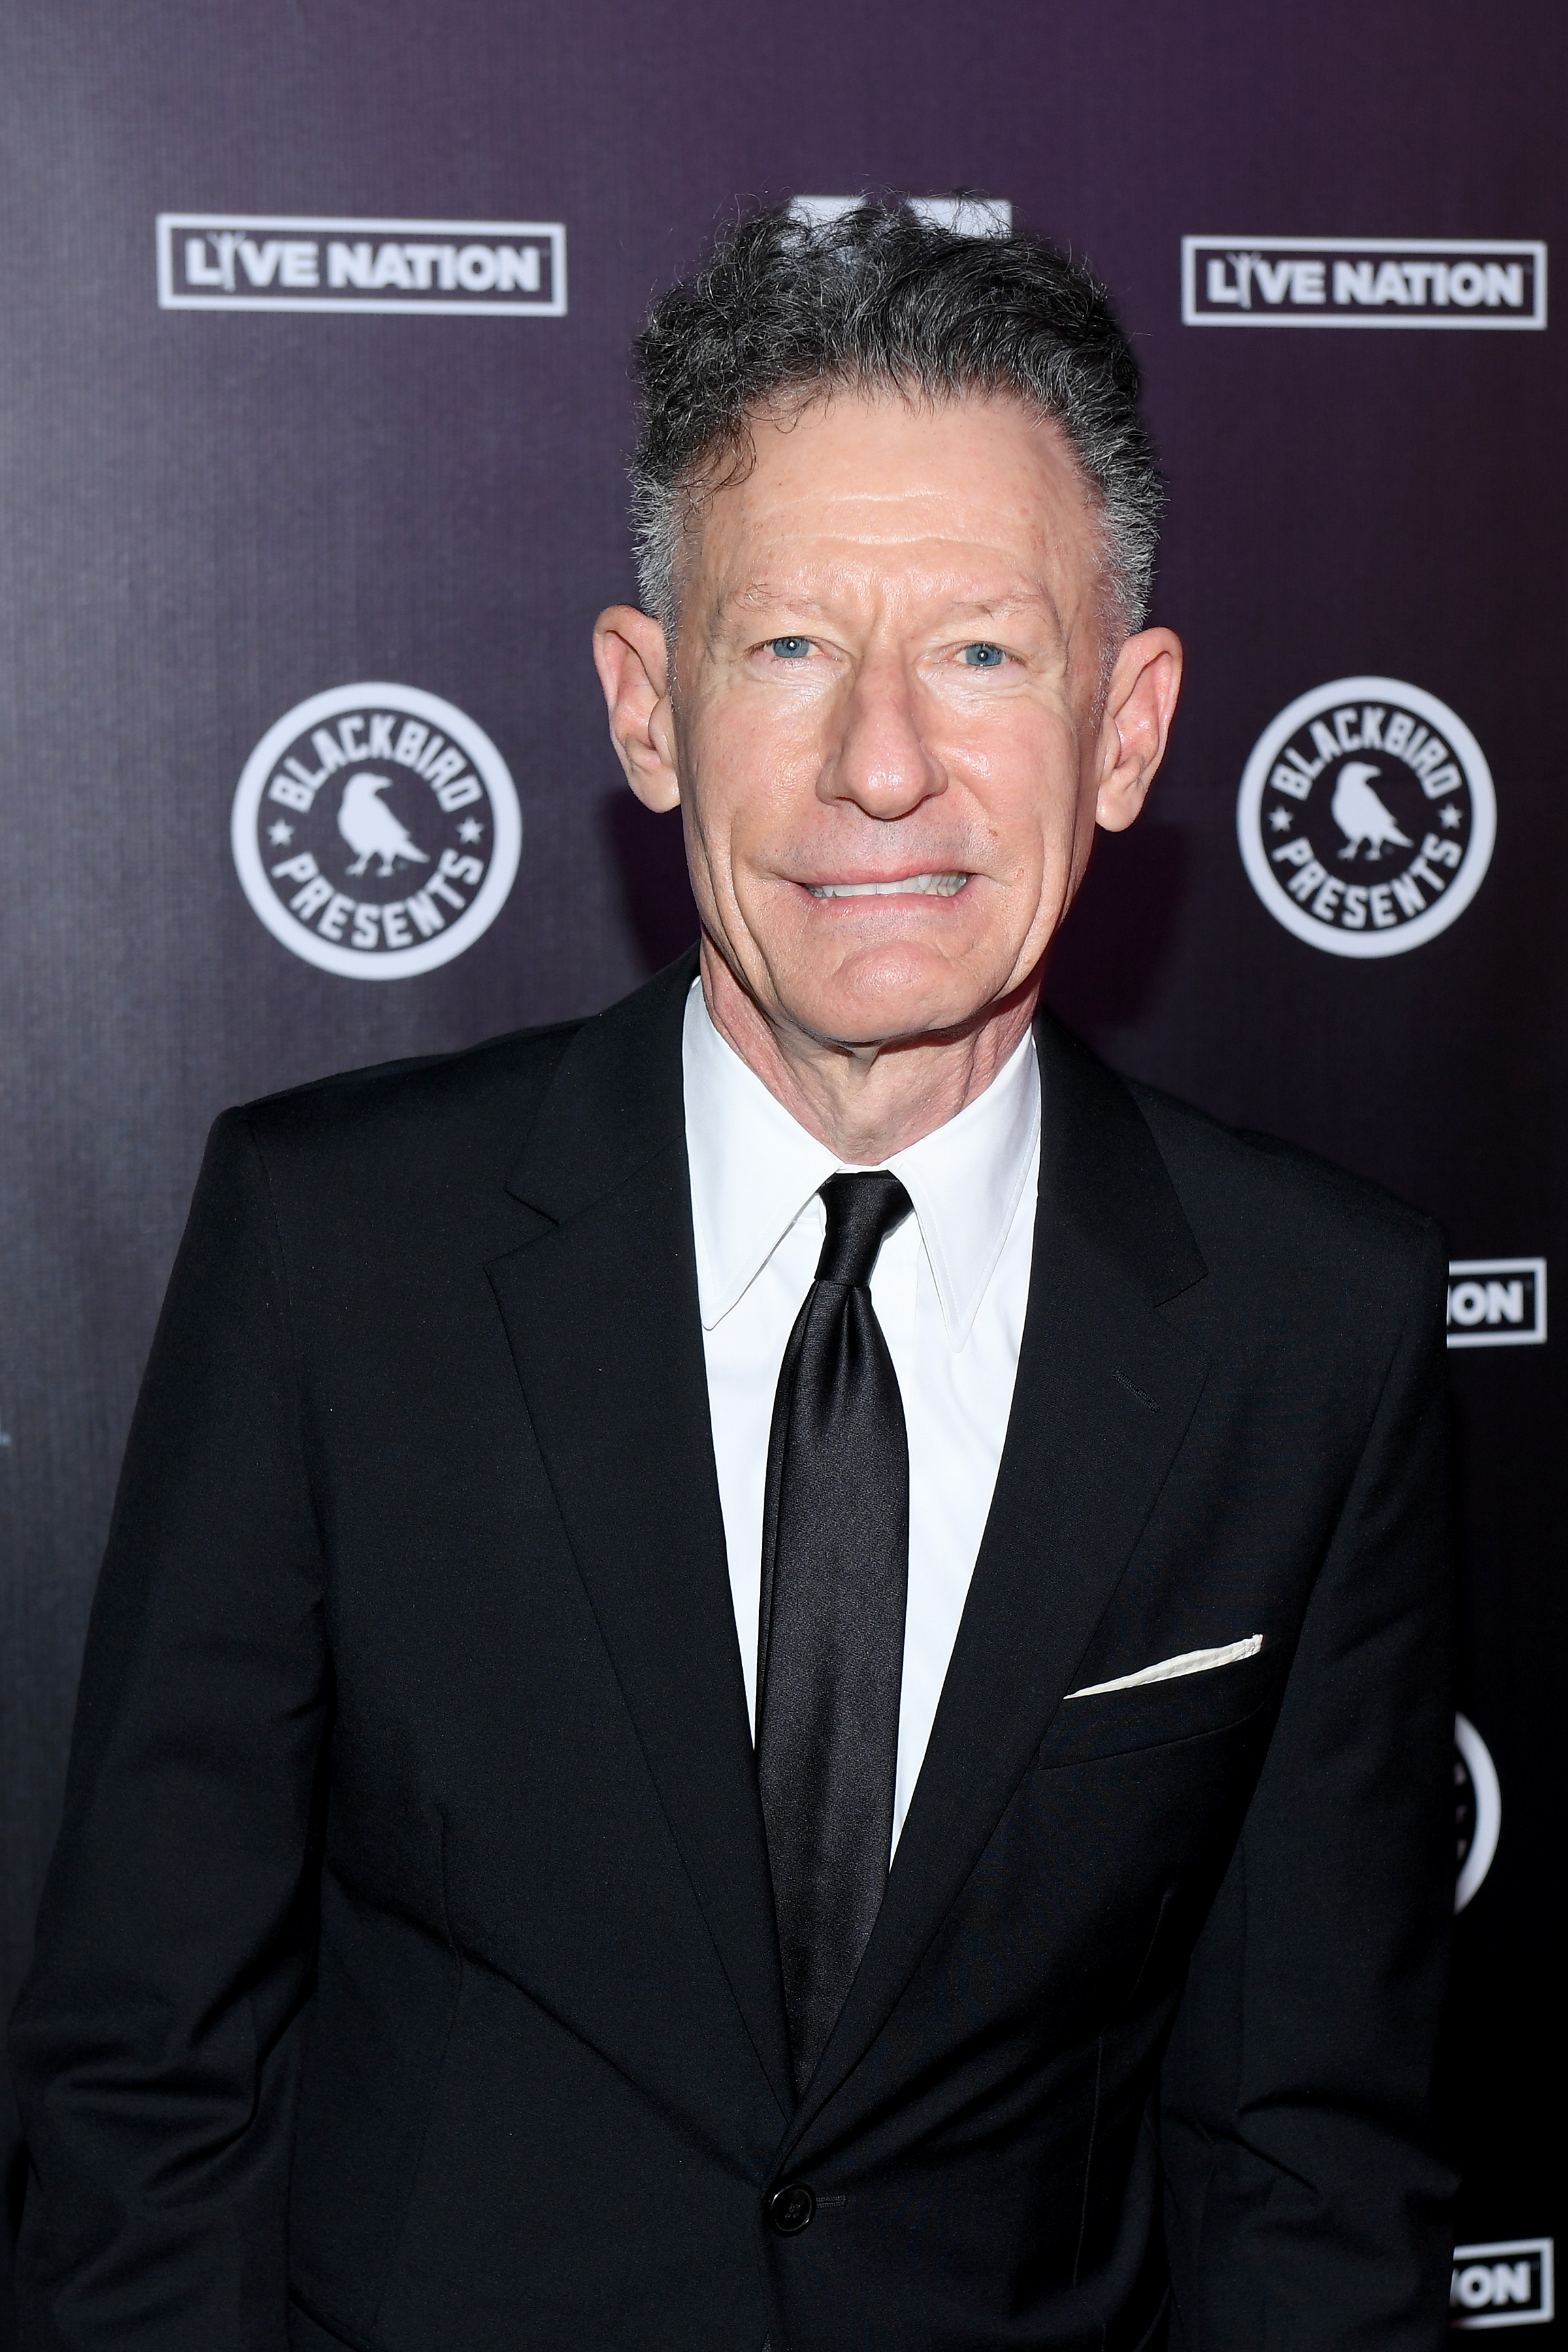 Lyle Lovett attends Willie: Life and Songs of an American Outlaw at Bridgestone Arena on January 12, 2019, in Nashville, Tennessee. | Source: Getty Images